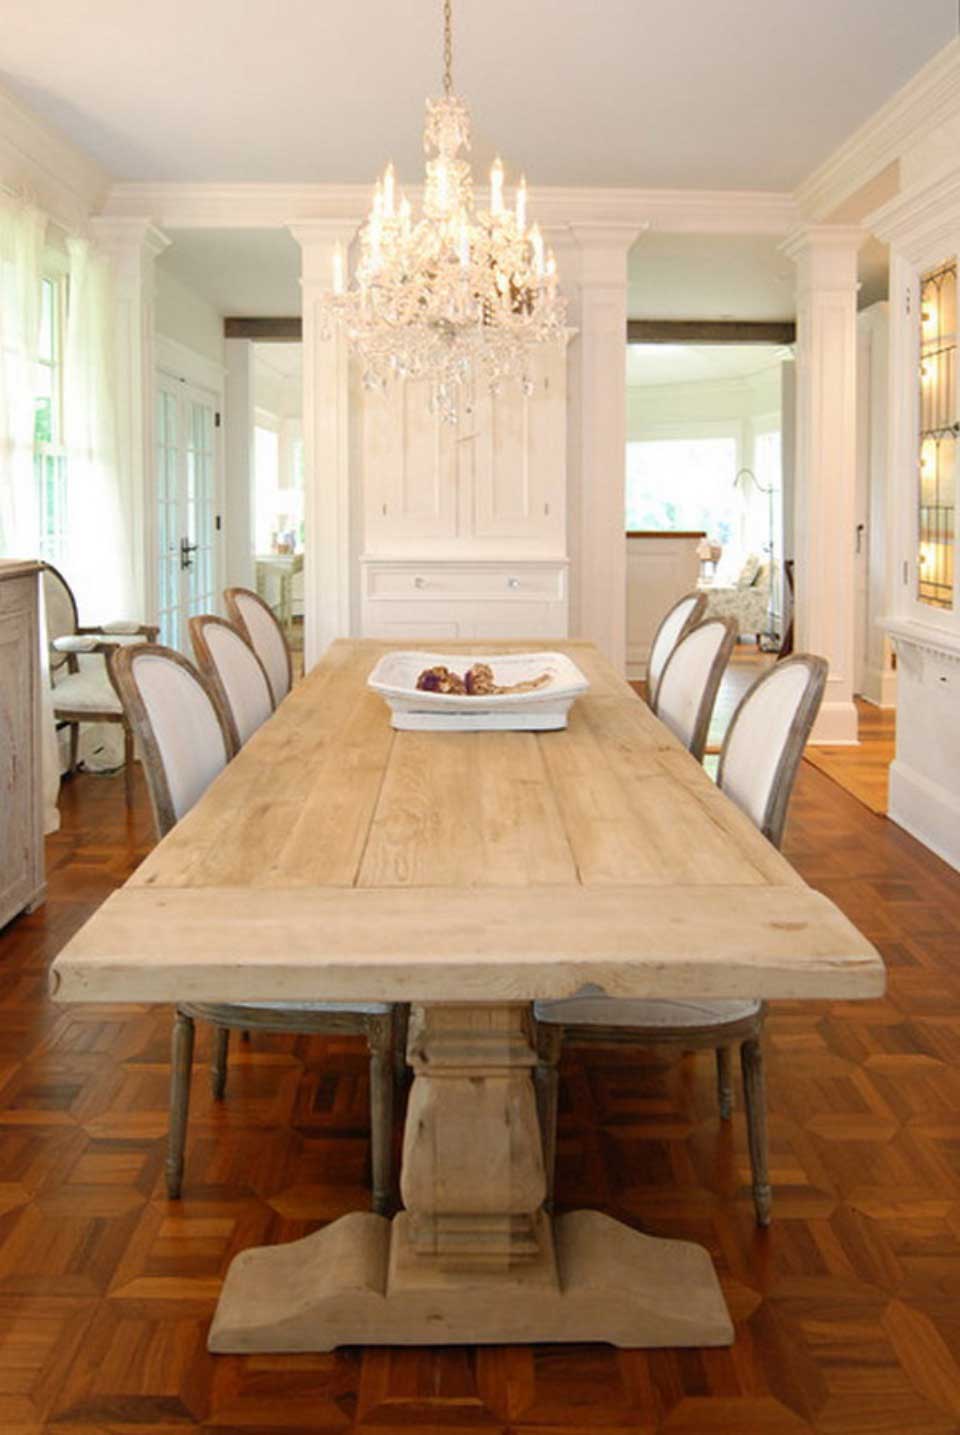 Dining Room Small Rustic Dining Room Ideas For Small House With Expanding Teak Wooden Dinner Table Design And Entrancing Beige White Chairs Idea Also Classy Dark Wooden Floor Design Dining Room The Best Simple Dining Room Ideas